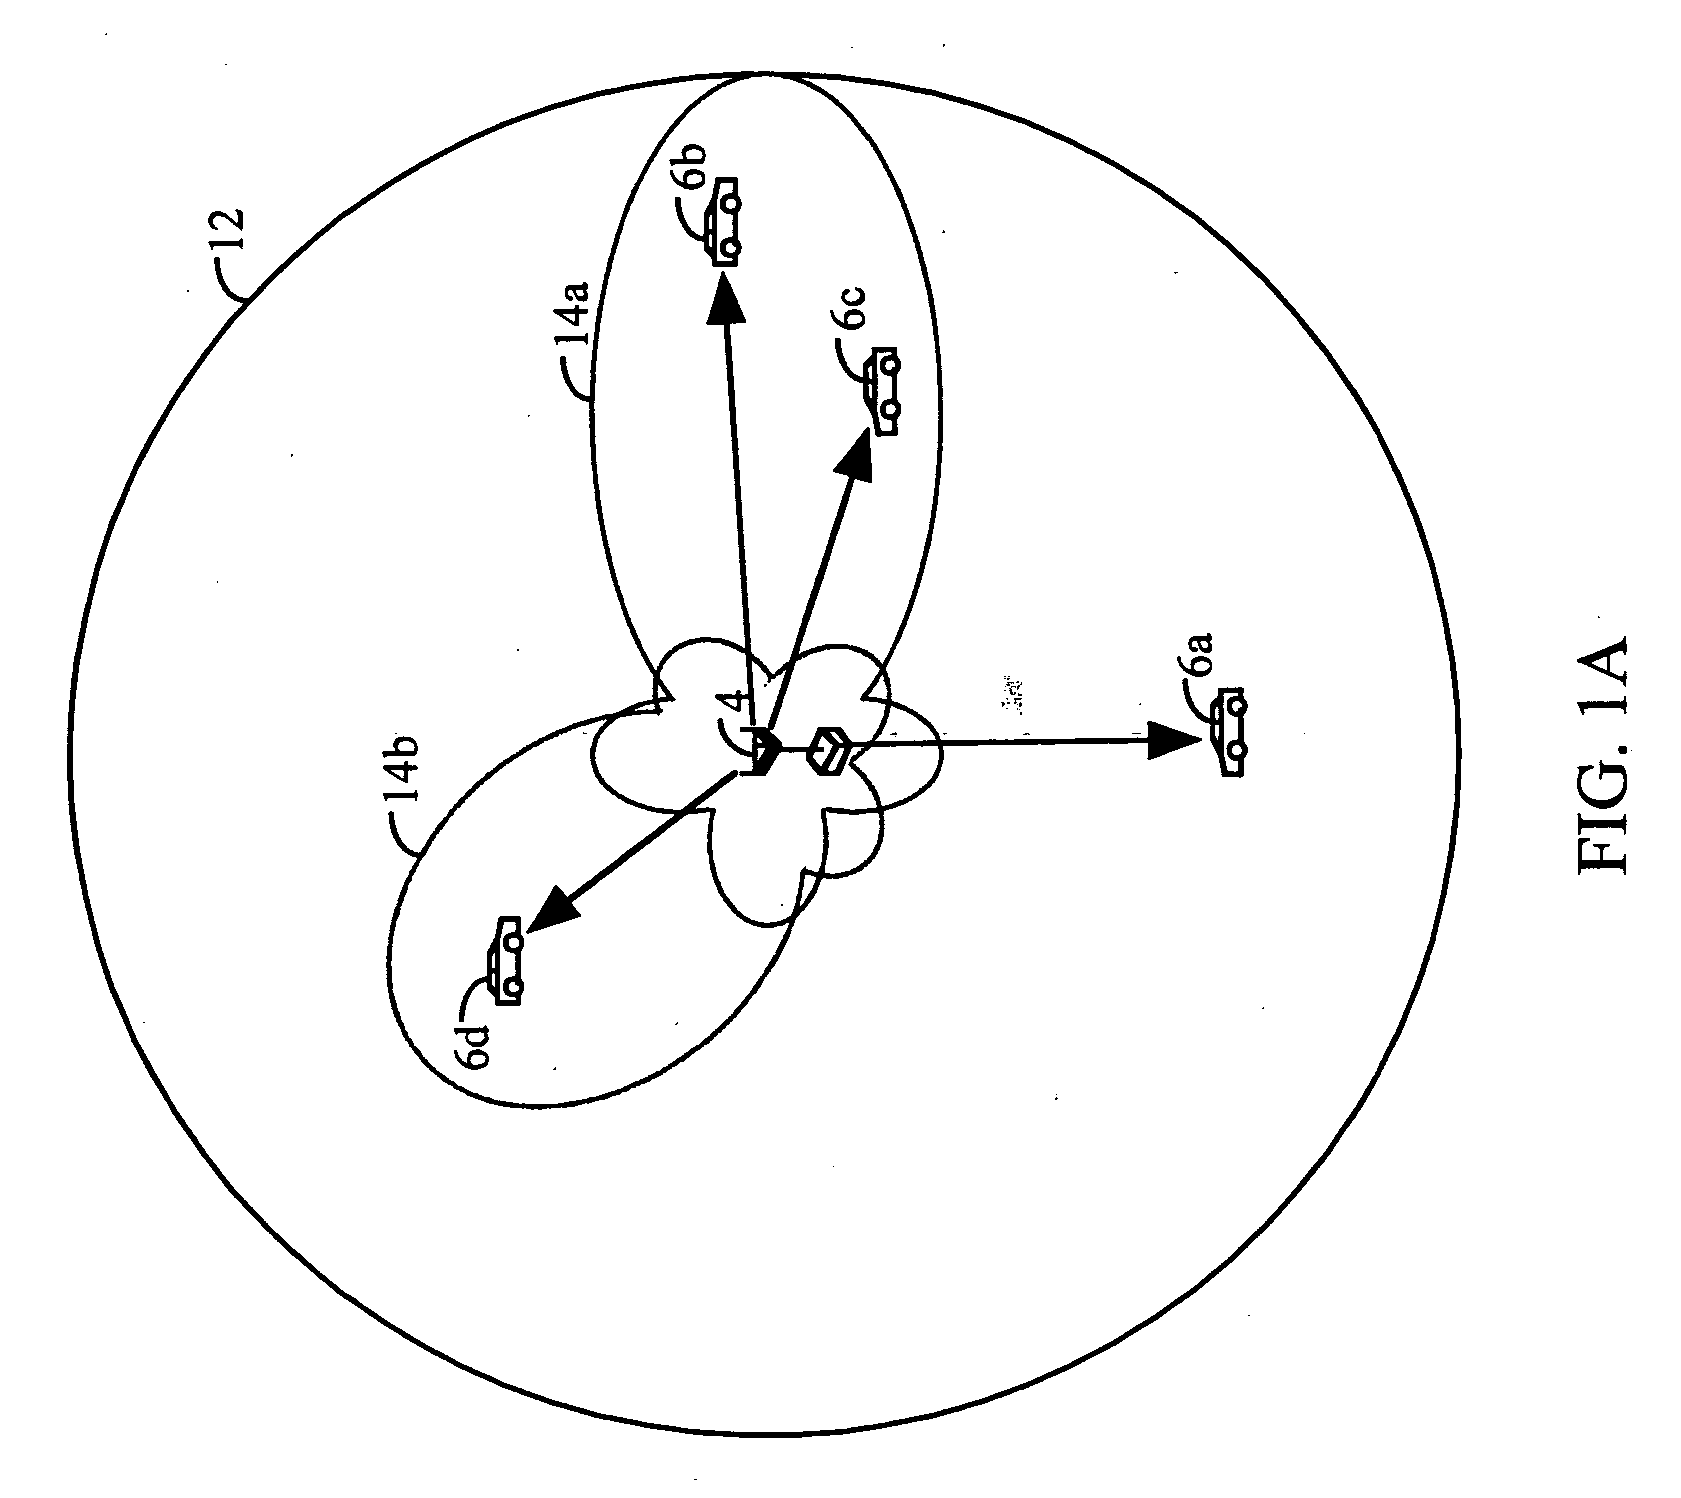 Method and apparatus for providing orthogonal spot beams, sectors, and picocells